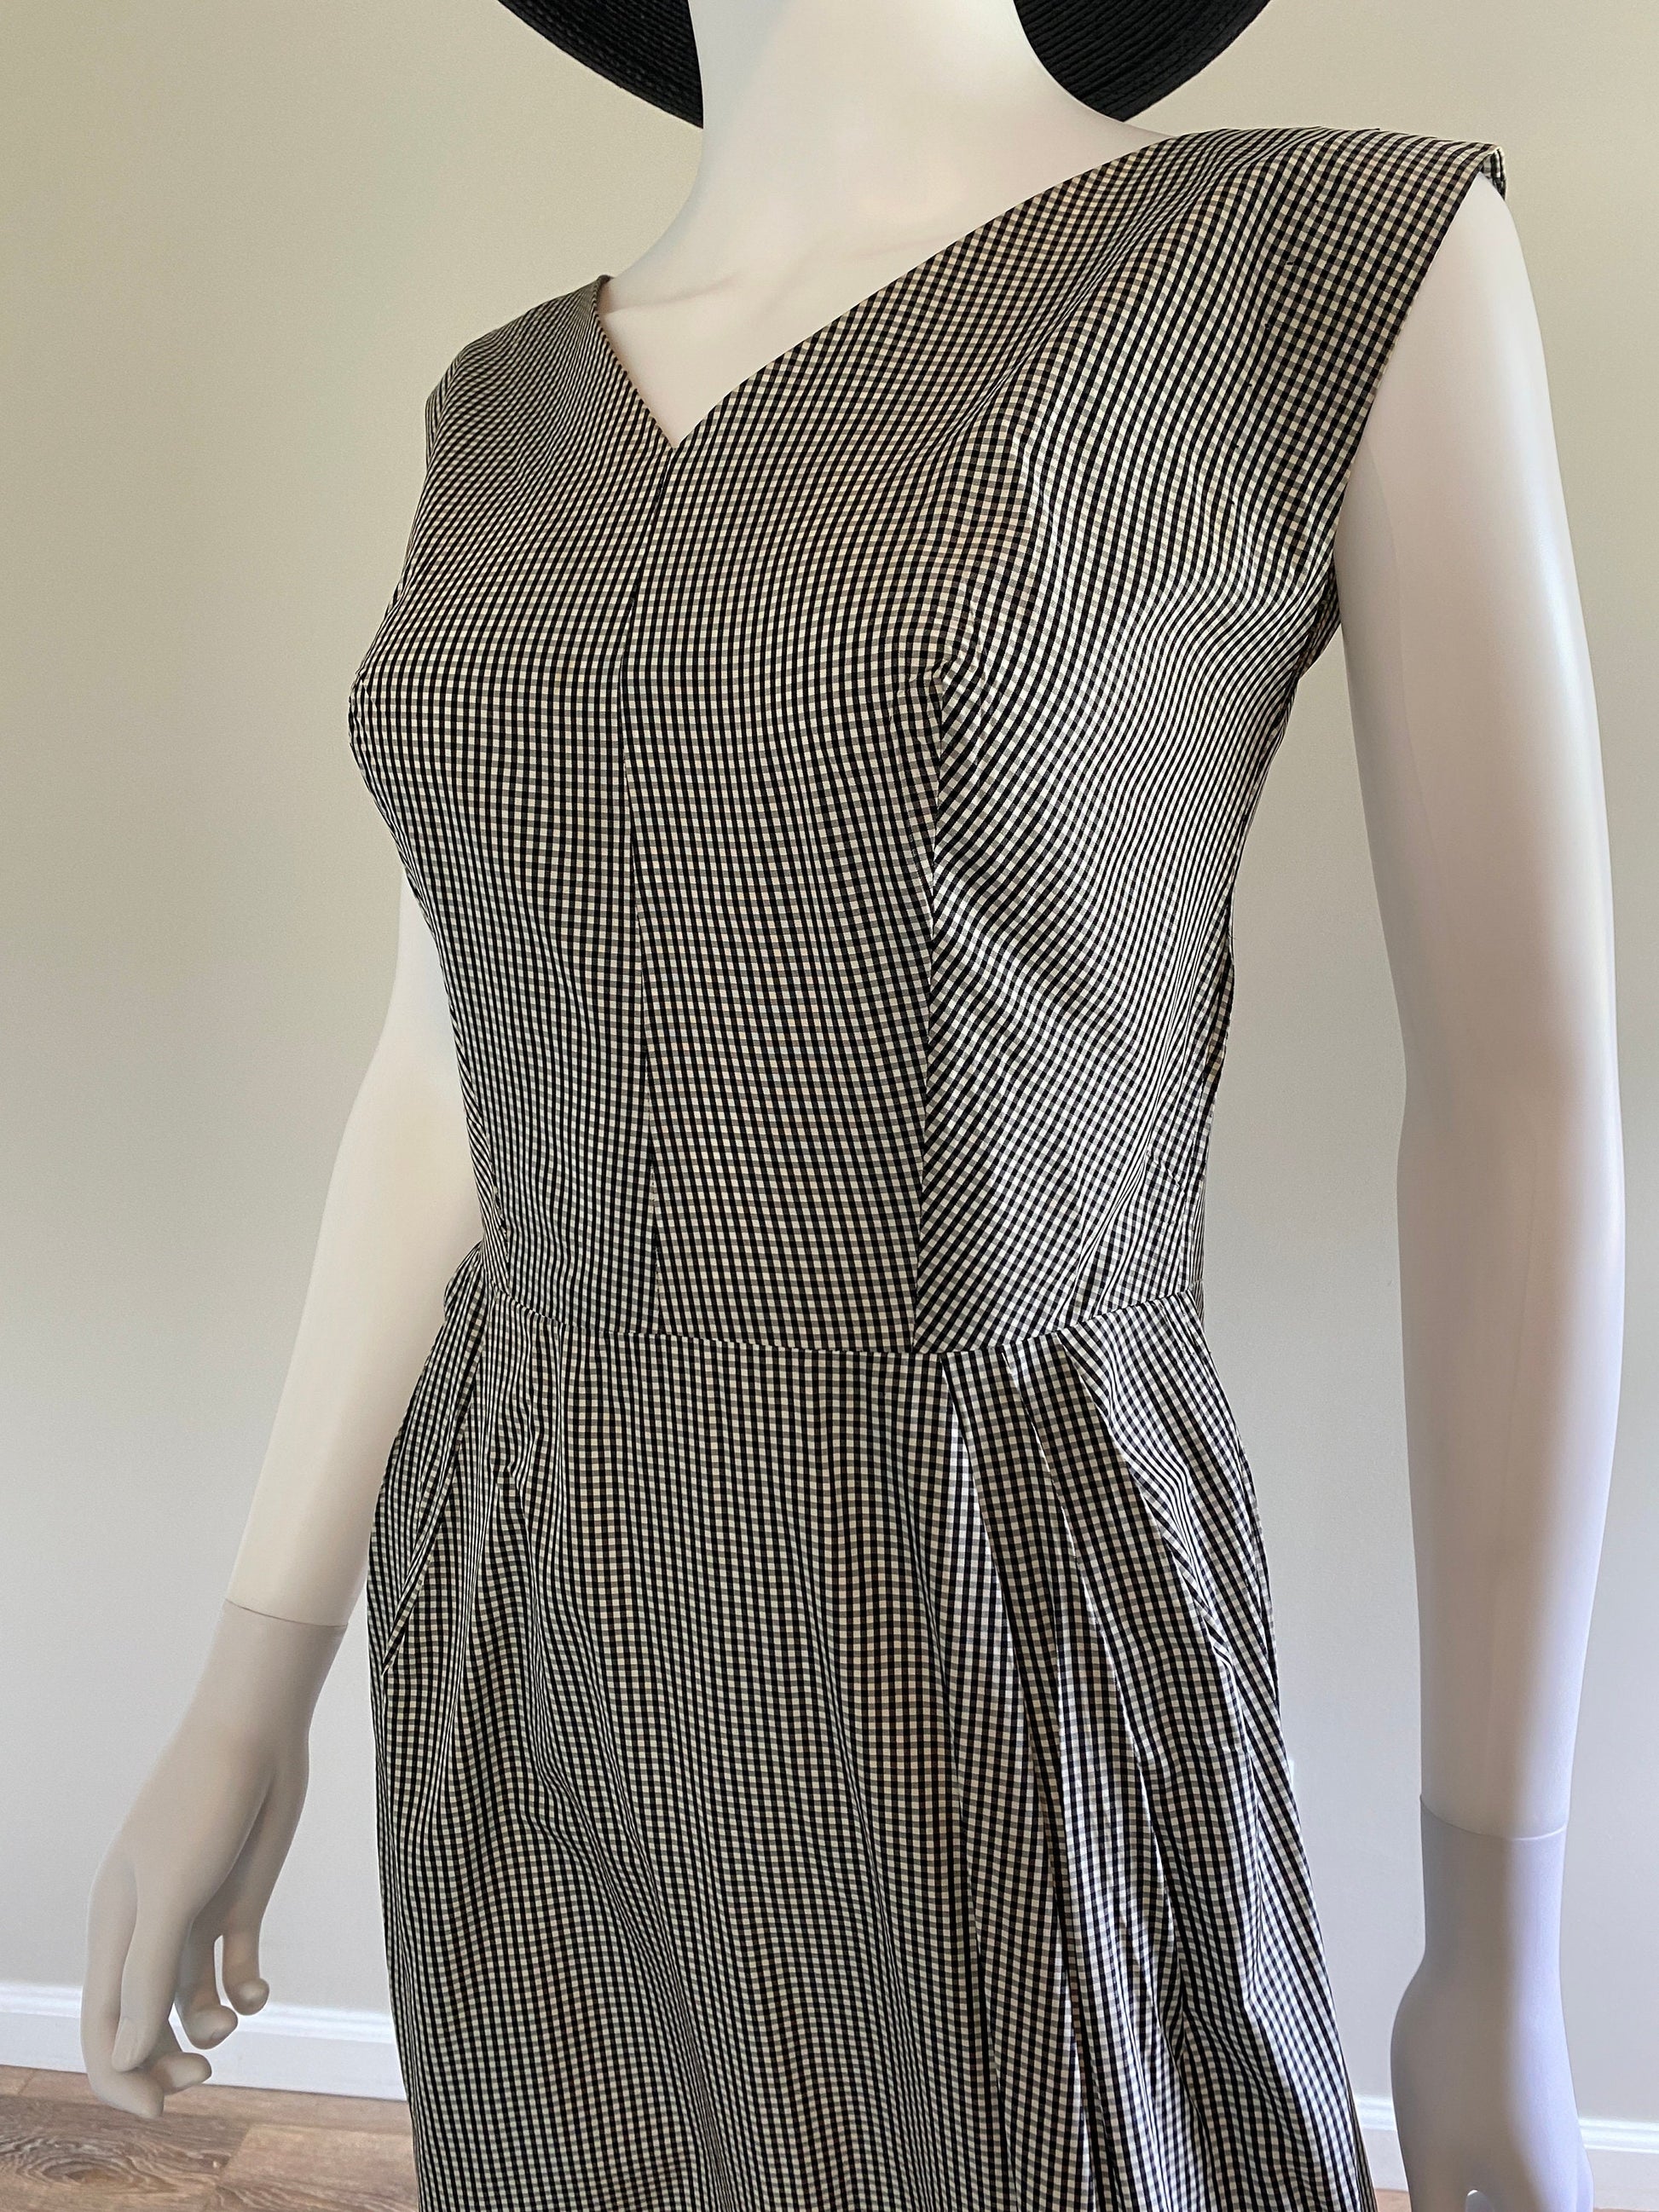 Vintage 1950s Black and White Gingham Plaid Party Dress / 50s Retro Summer Wiggle Dress / Size S M